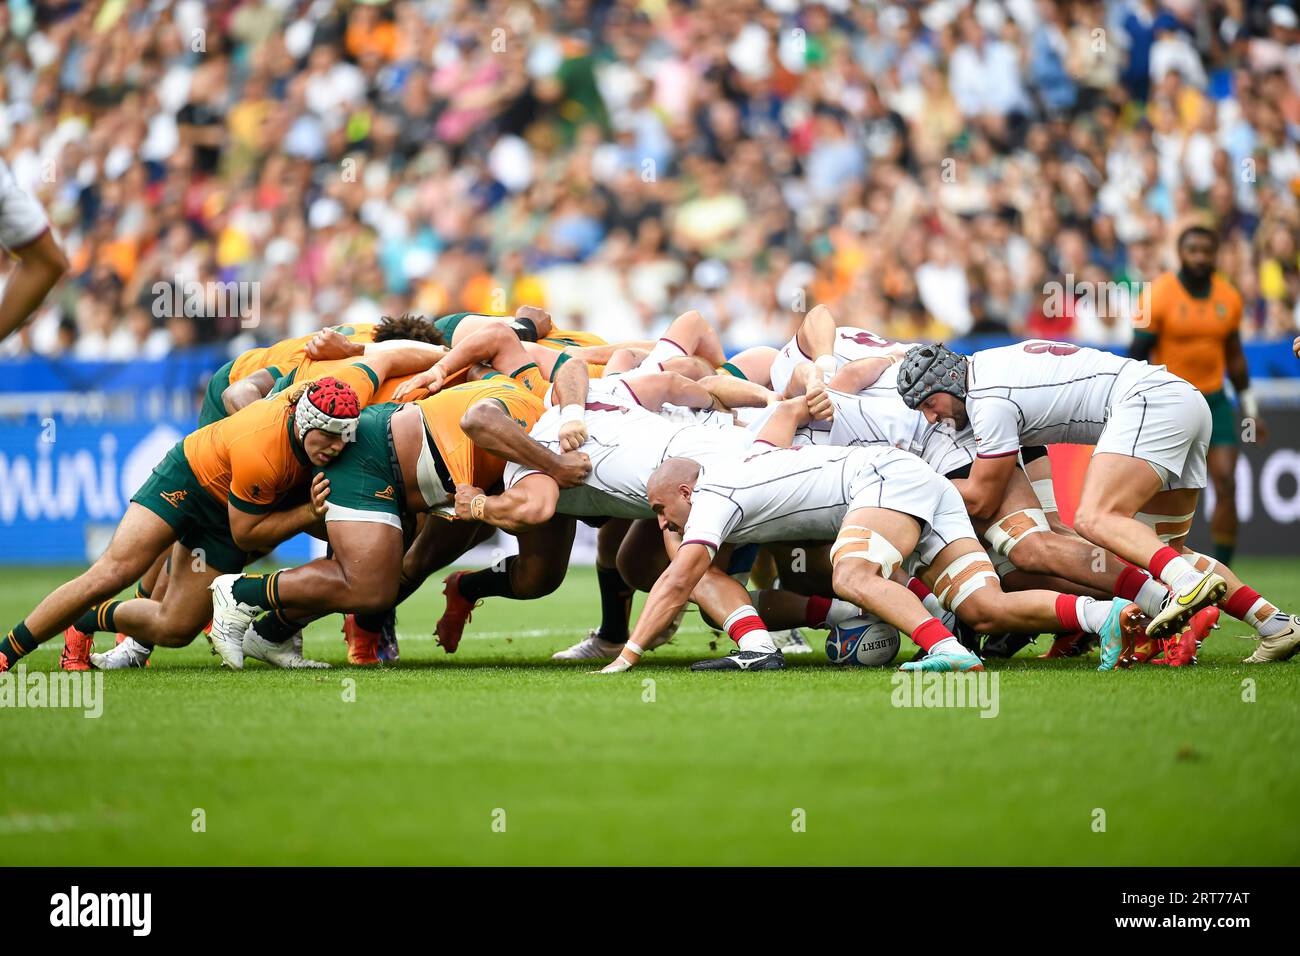 A scrum or scrummage during the Rugby World Cup RWC 2023 match between Australia Wallabies and Georgia on September 9, 2023 at Stade de France in Saint-Denis near Paris, France. Credit: Victor Joly/Alamy Live News Stock Photo